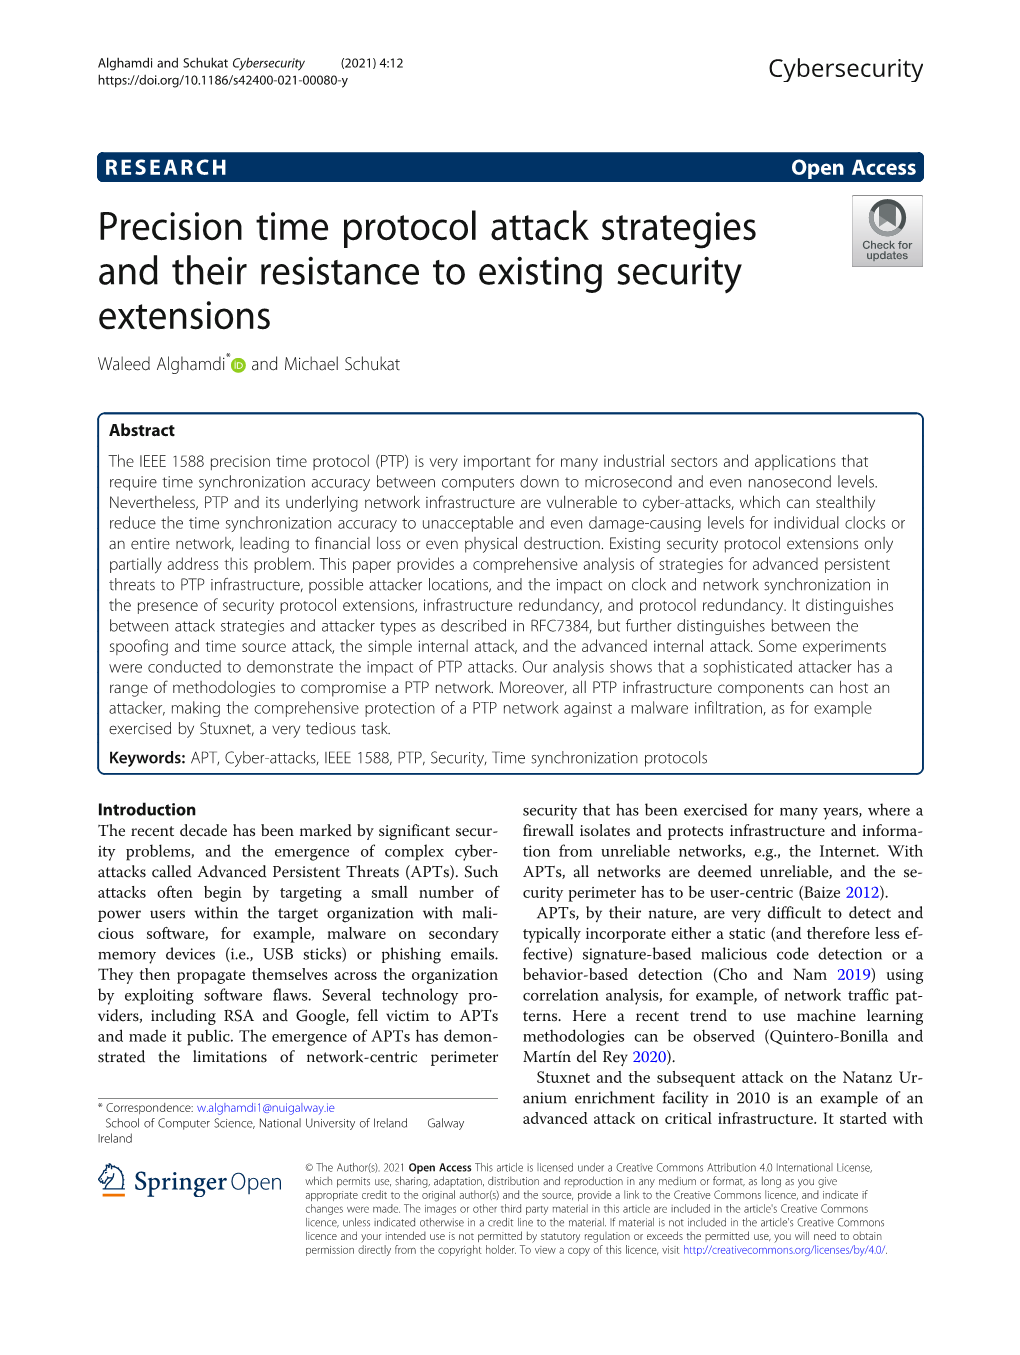 Precision Time Protocol Attack Strategies and Their Resistance to Existing Security Extensions Waleed Alghamdi* and Michael Schukat